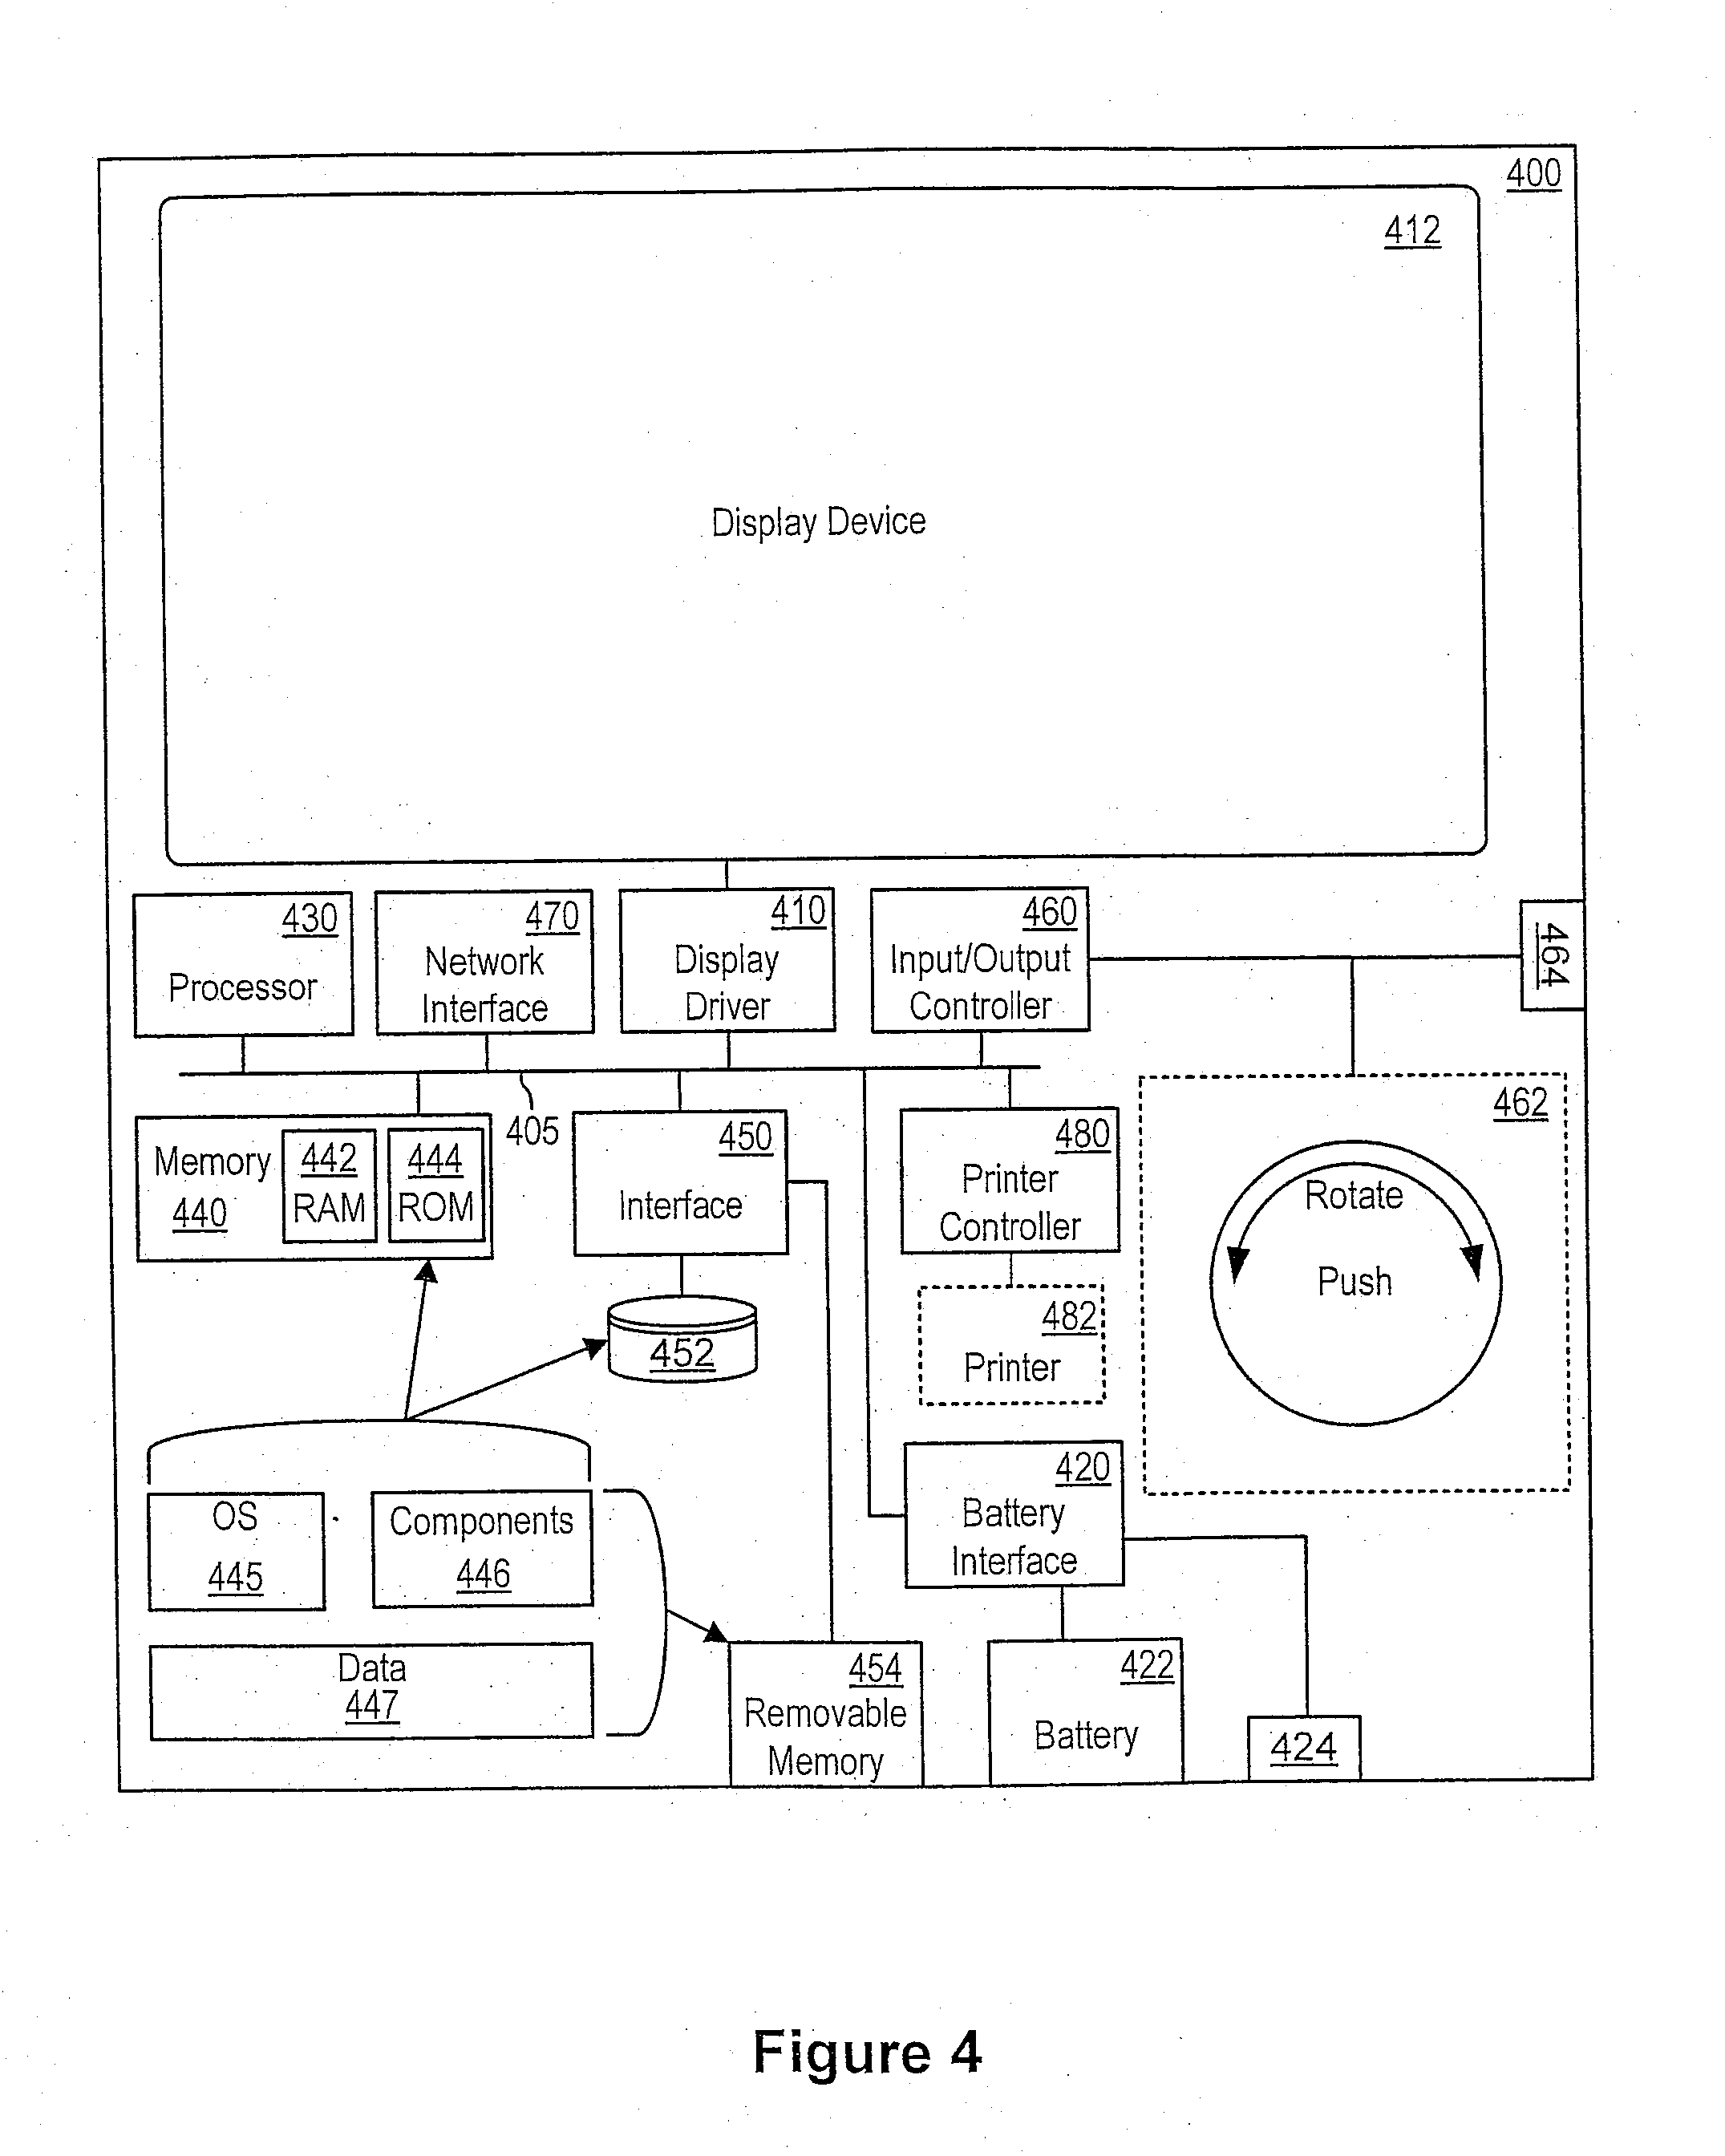 Automated battery and data delivery system